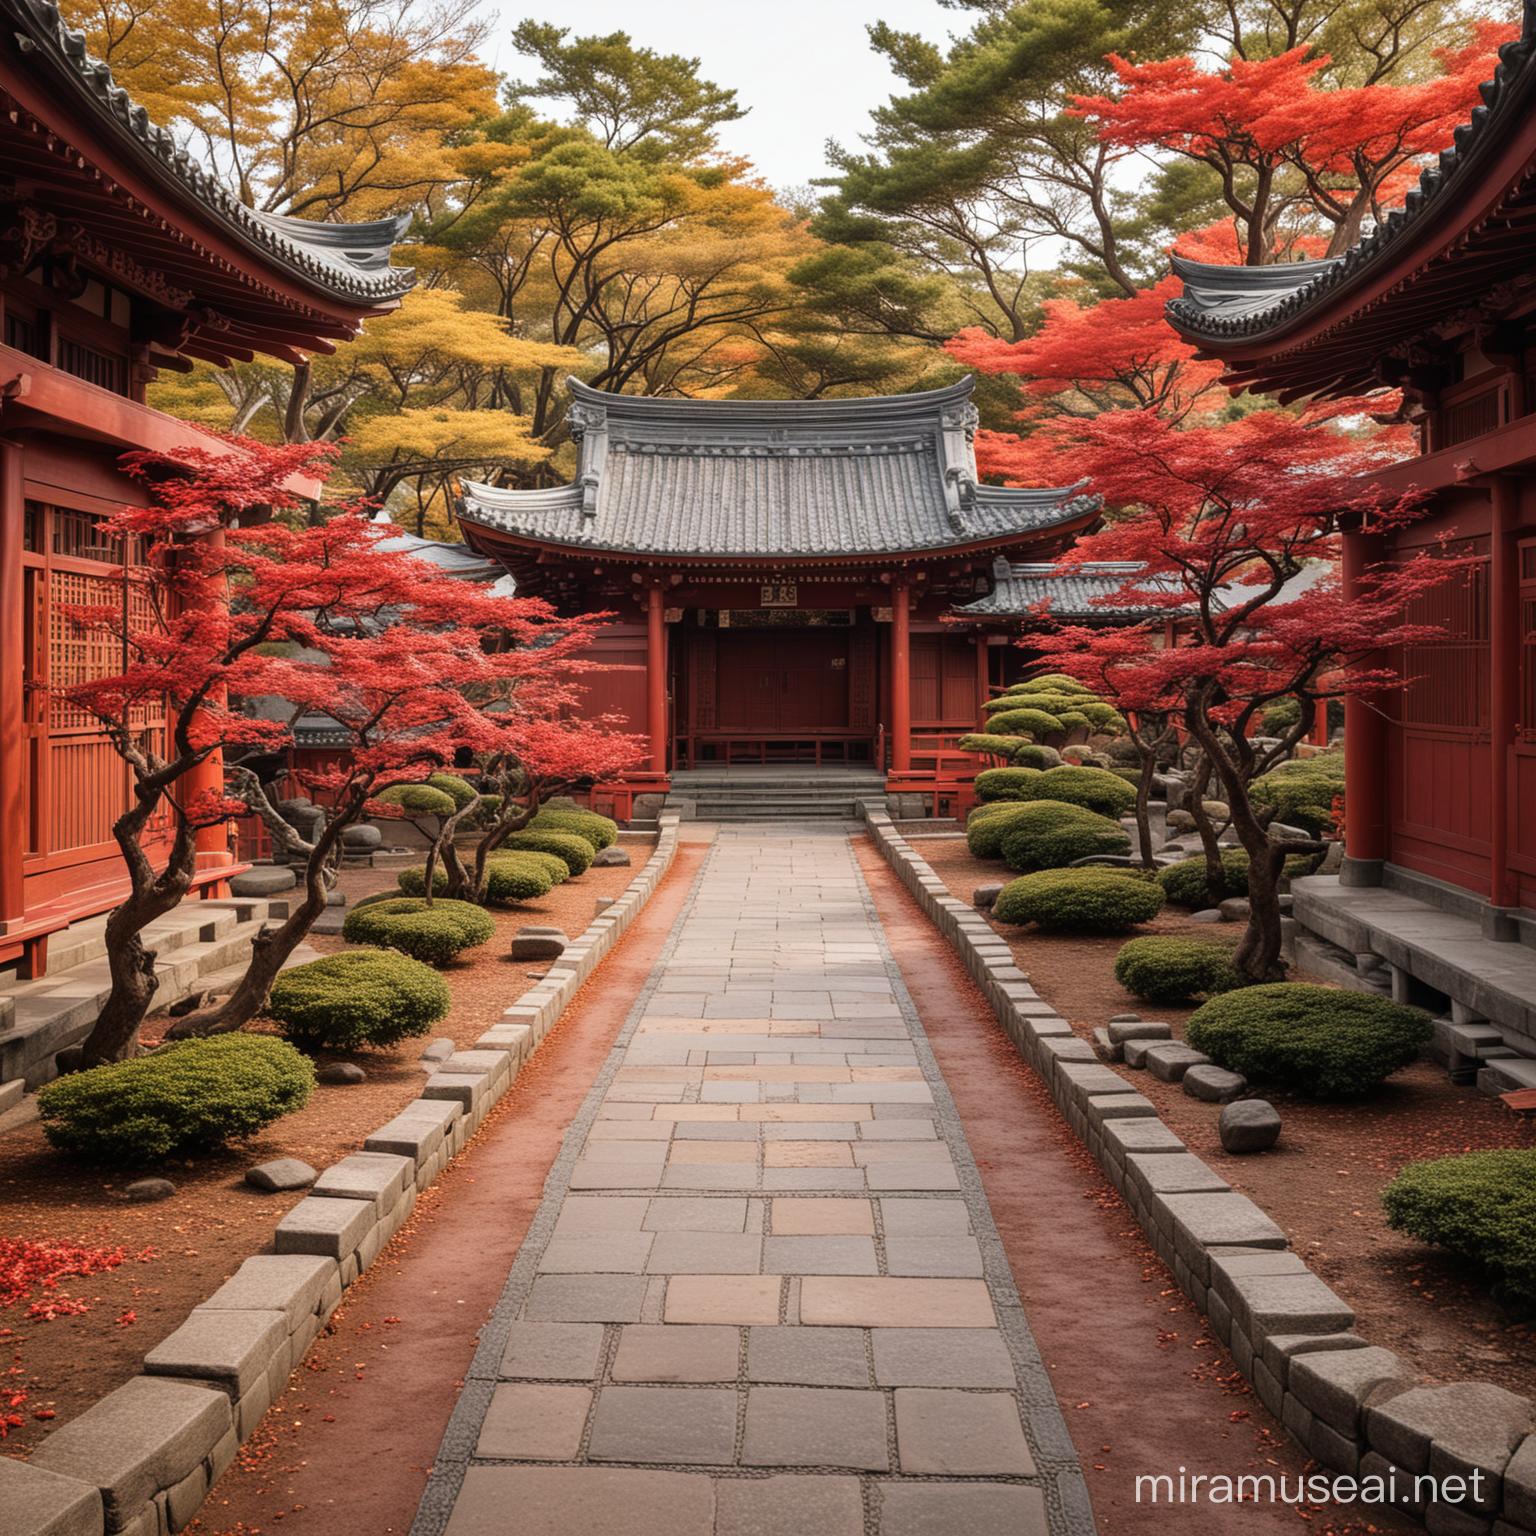 Red JapaneseStyle Building Surrounded by Dueling Dragons